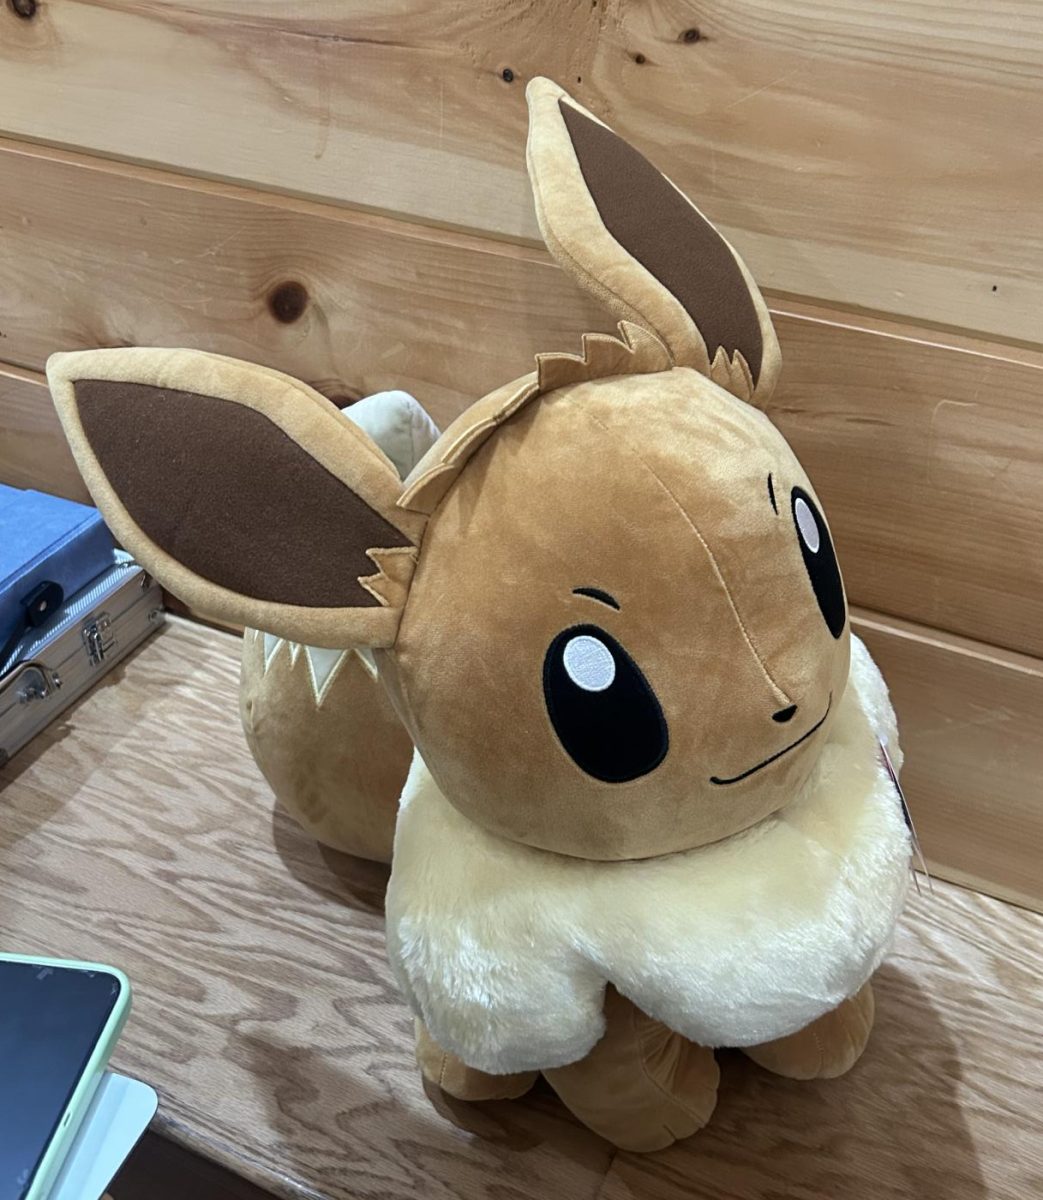 A stuffed Eevee. Photo courtesy of the author